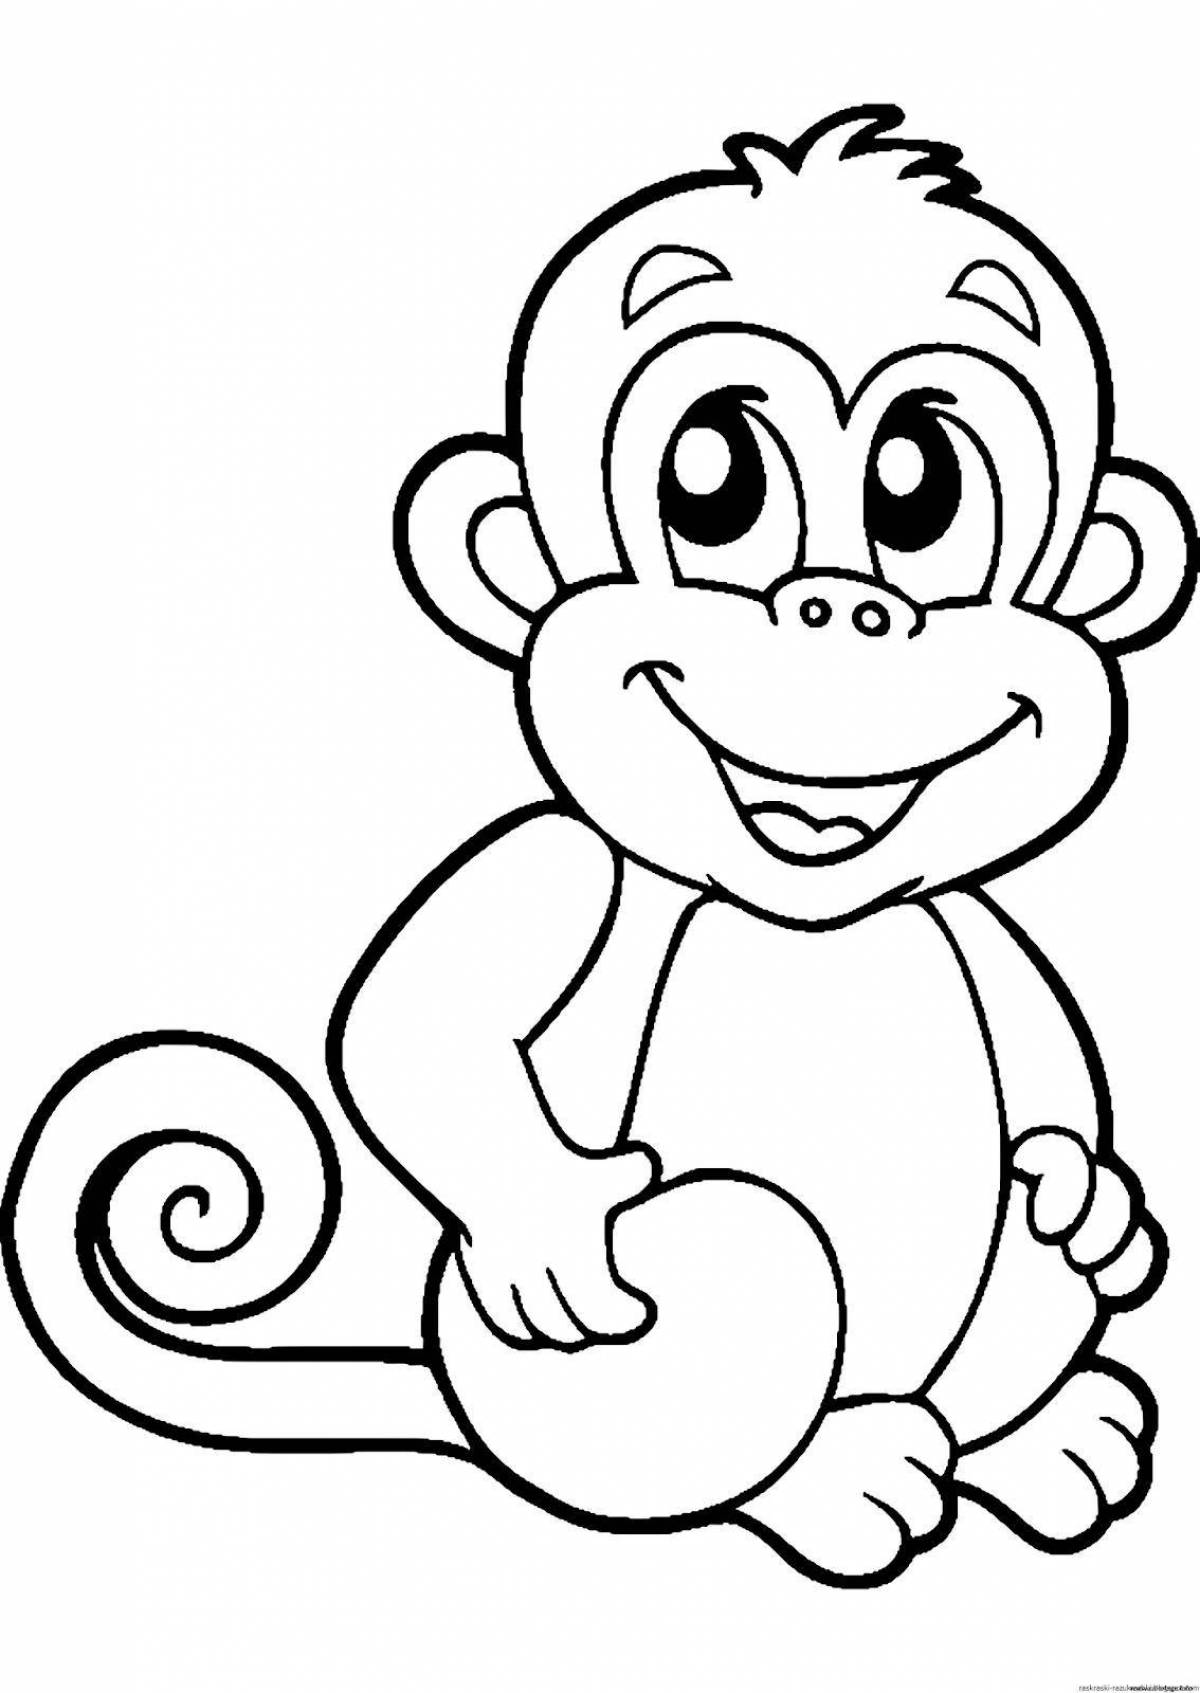 Tempting monkey coloring book for kids